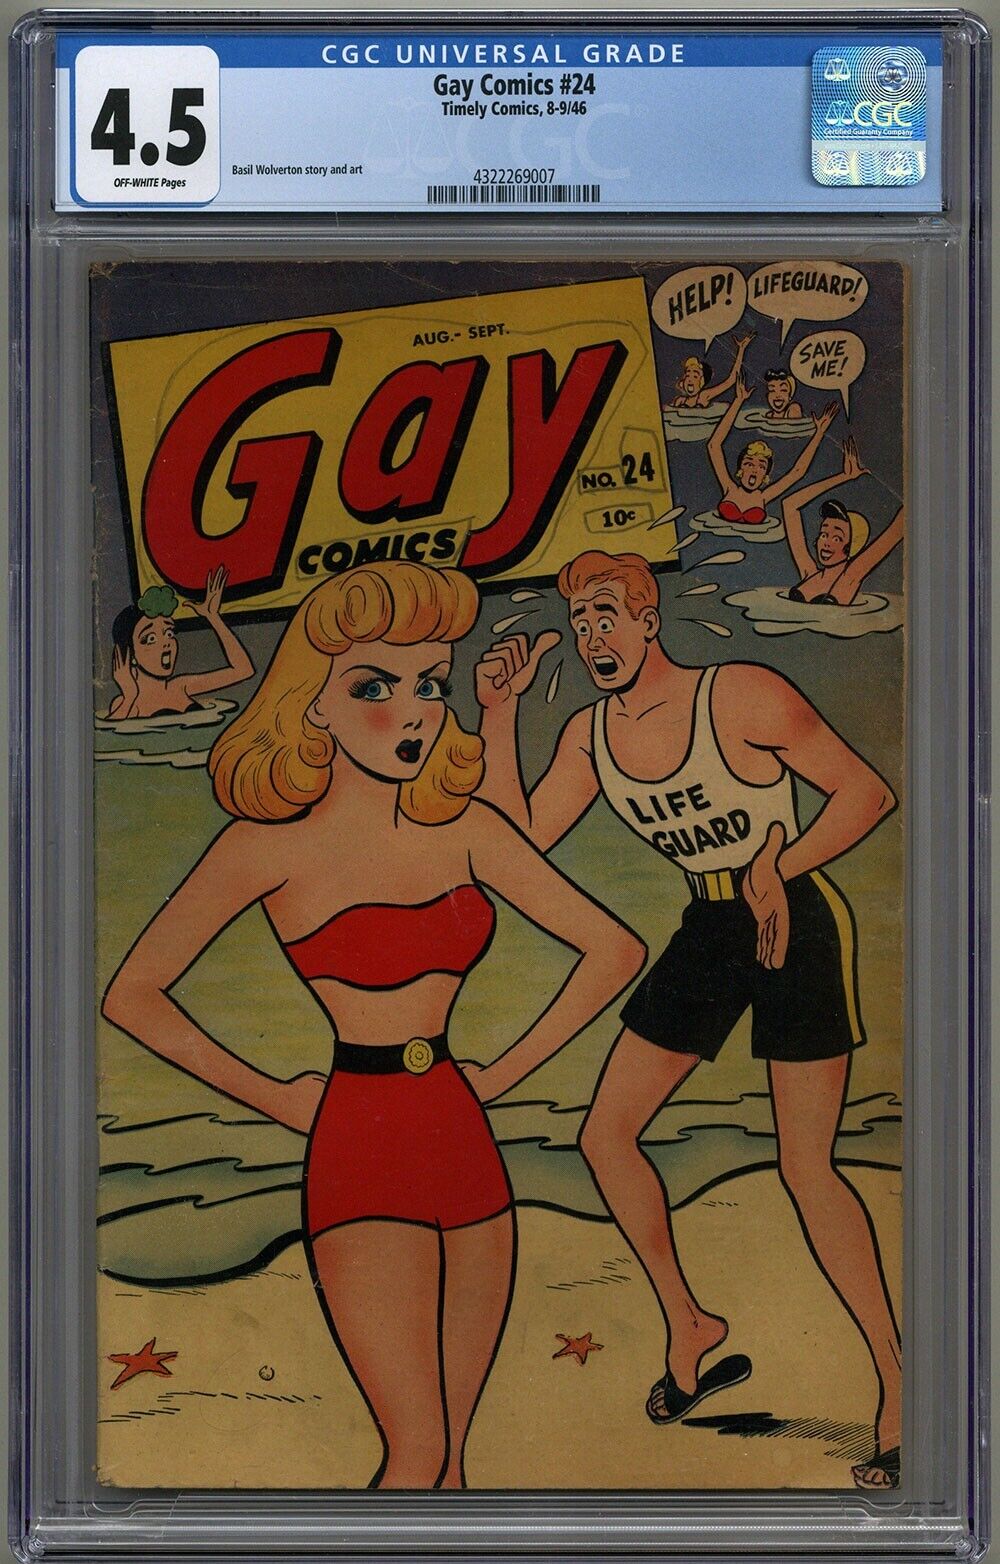 GAY COMICS #24 CGC 4.5 OFF-WHITE PAGES TIMELY COMICS 1946